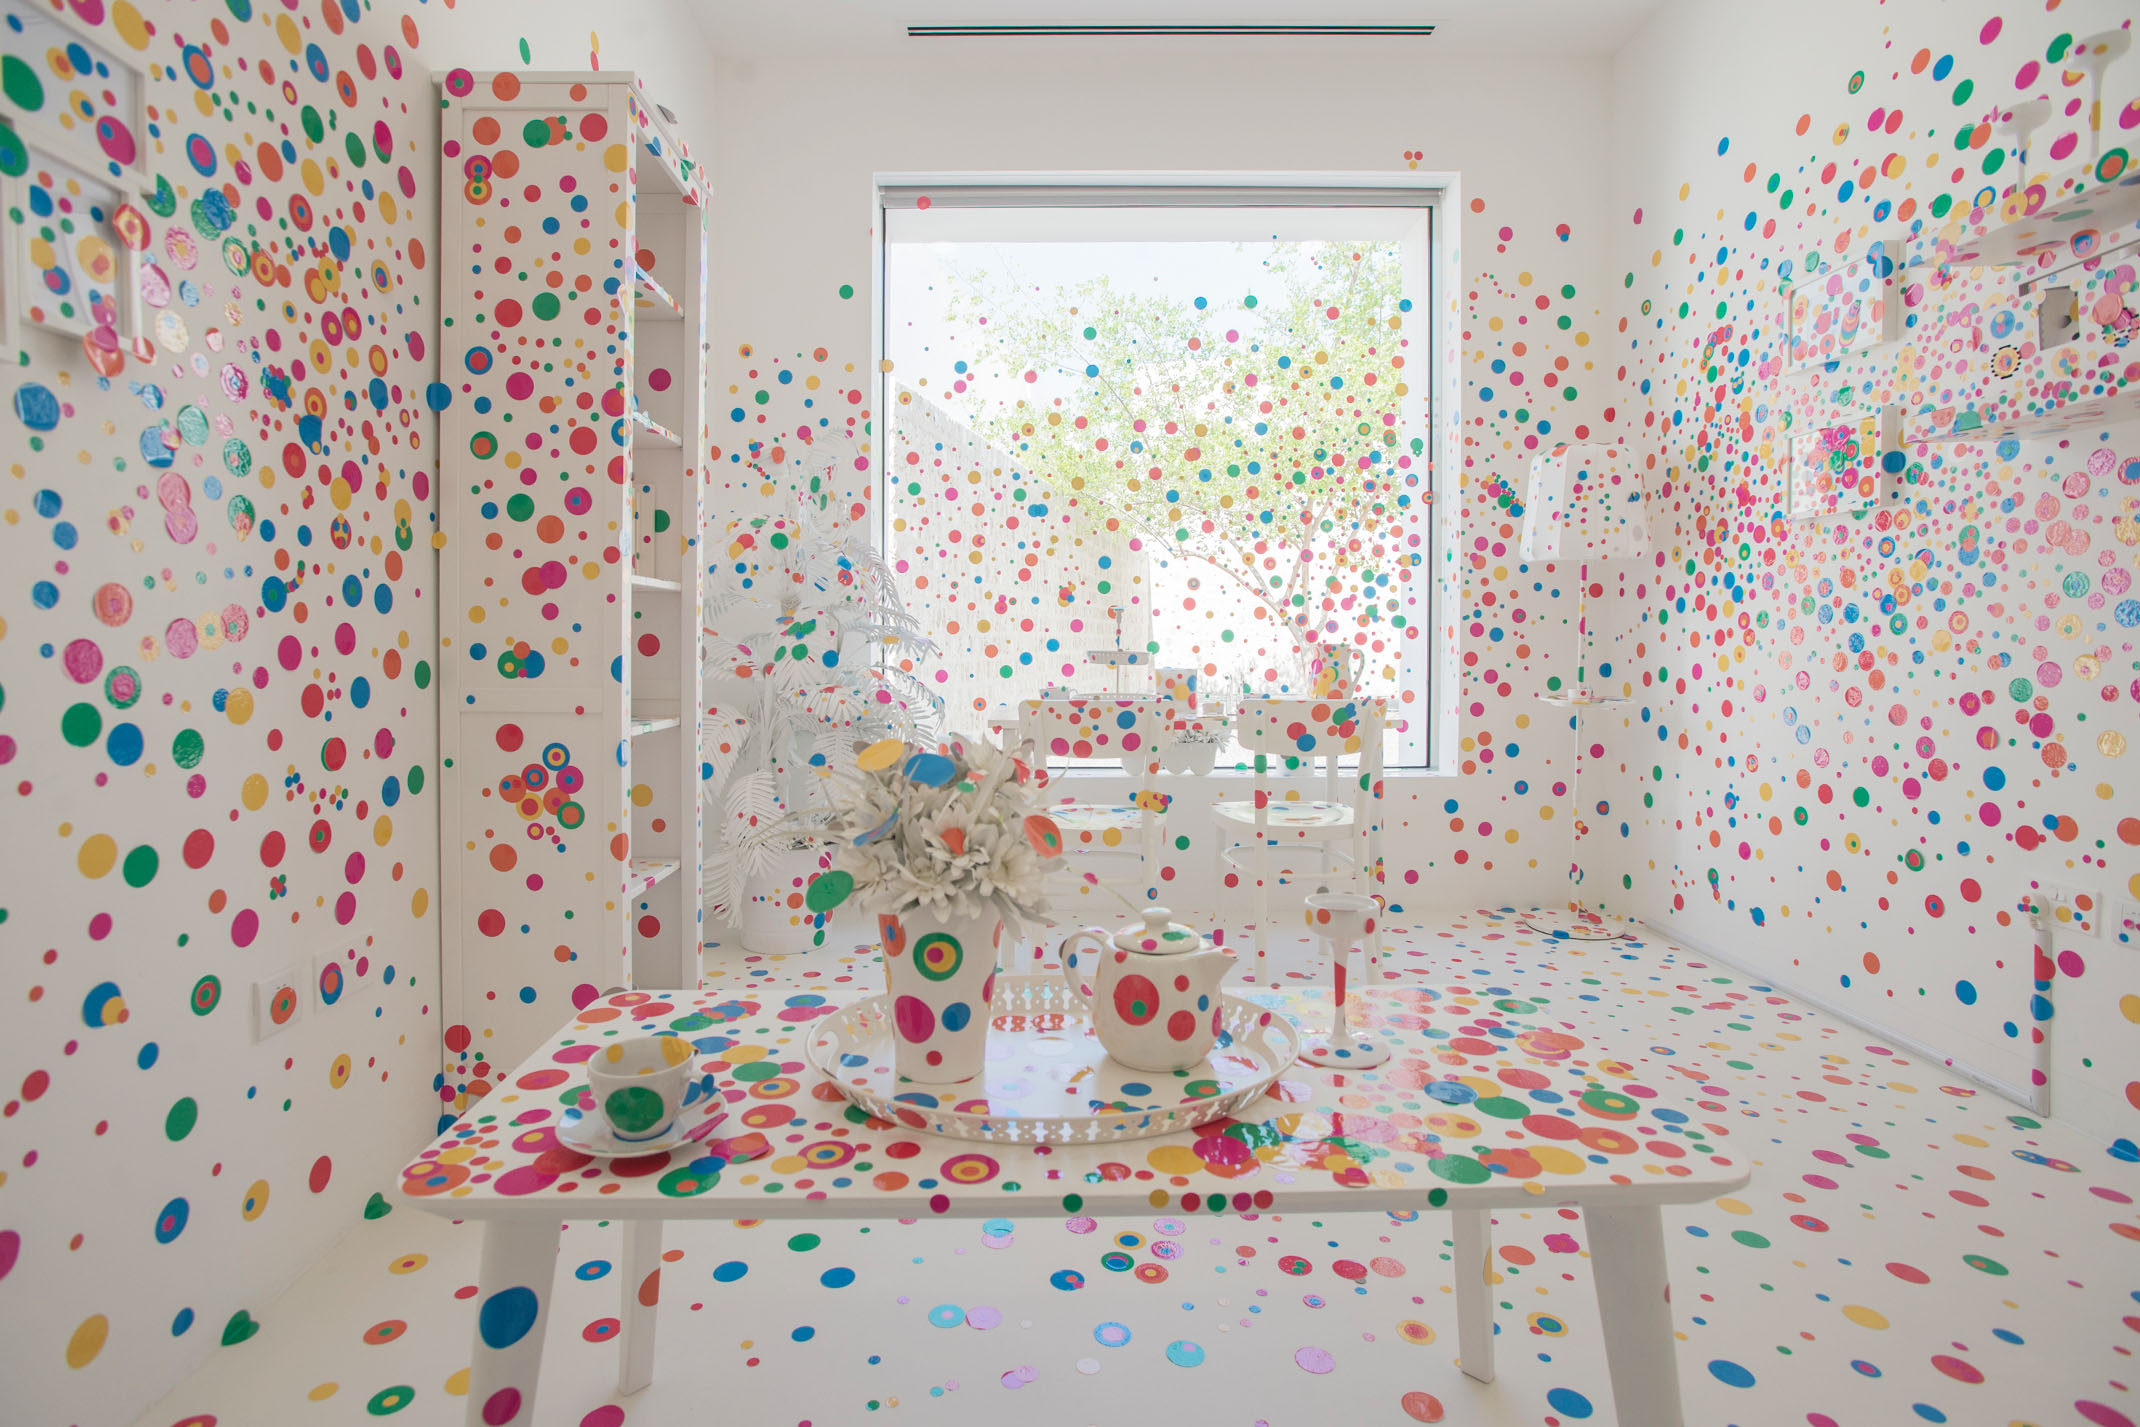 The obliteration room Image